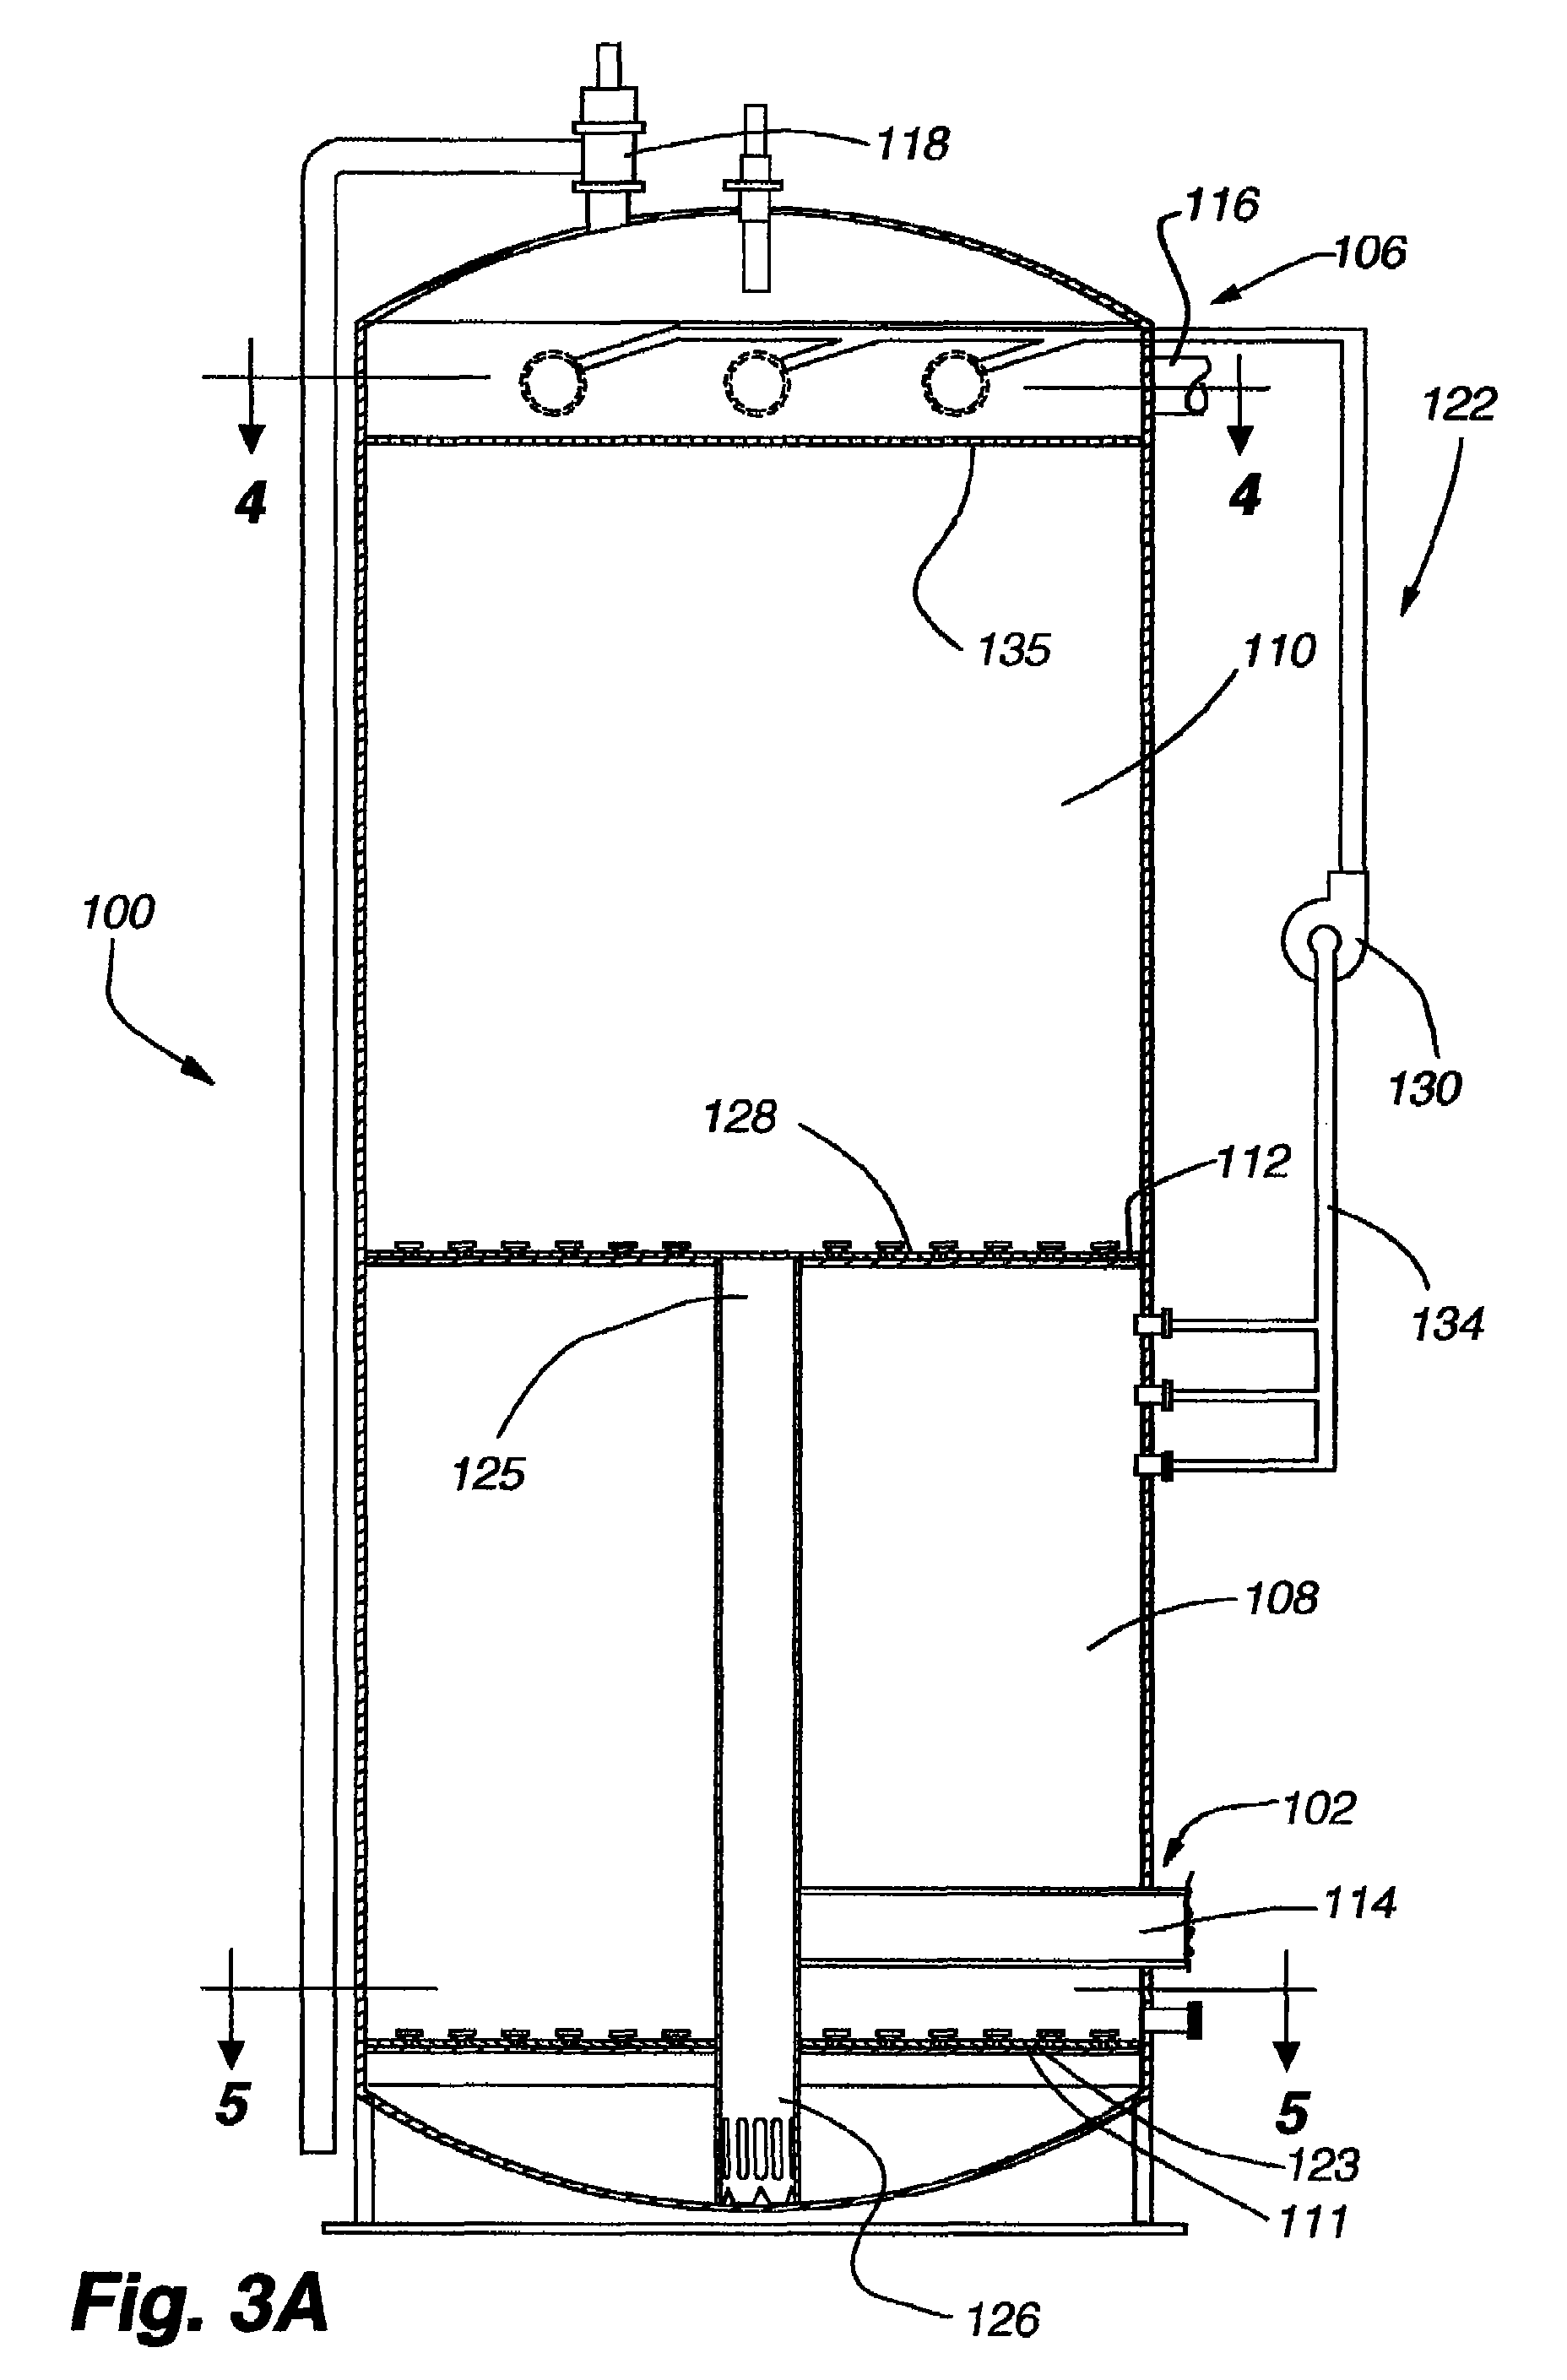 System and apparatus for purging absorptive materials used in the removal of contaminates from an aqueous medium